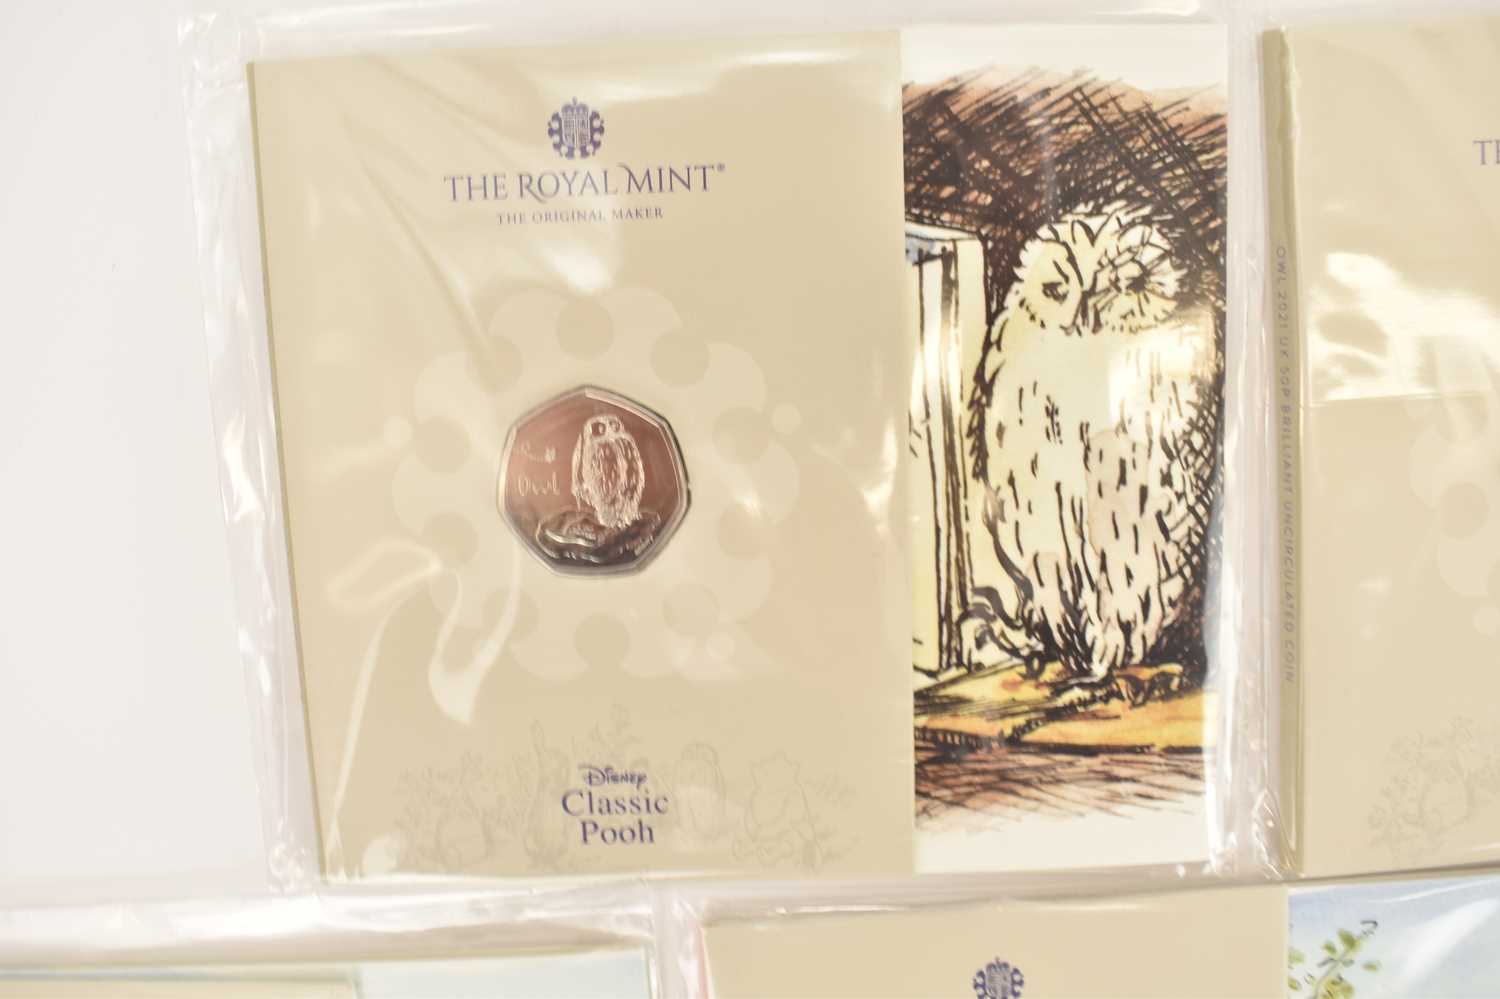 THE ROYAL MINT; 'Disney Winnie-the-Pooh Ninety-five Years' and 'Classic Pooh' twelve UK 50p - Image 7 of 7